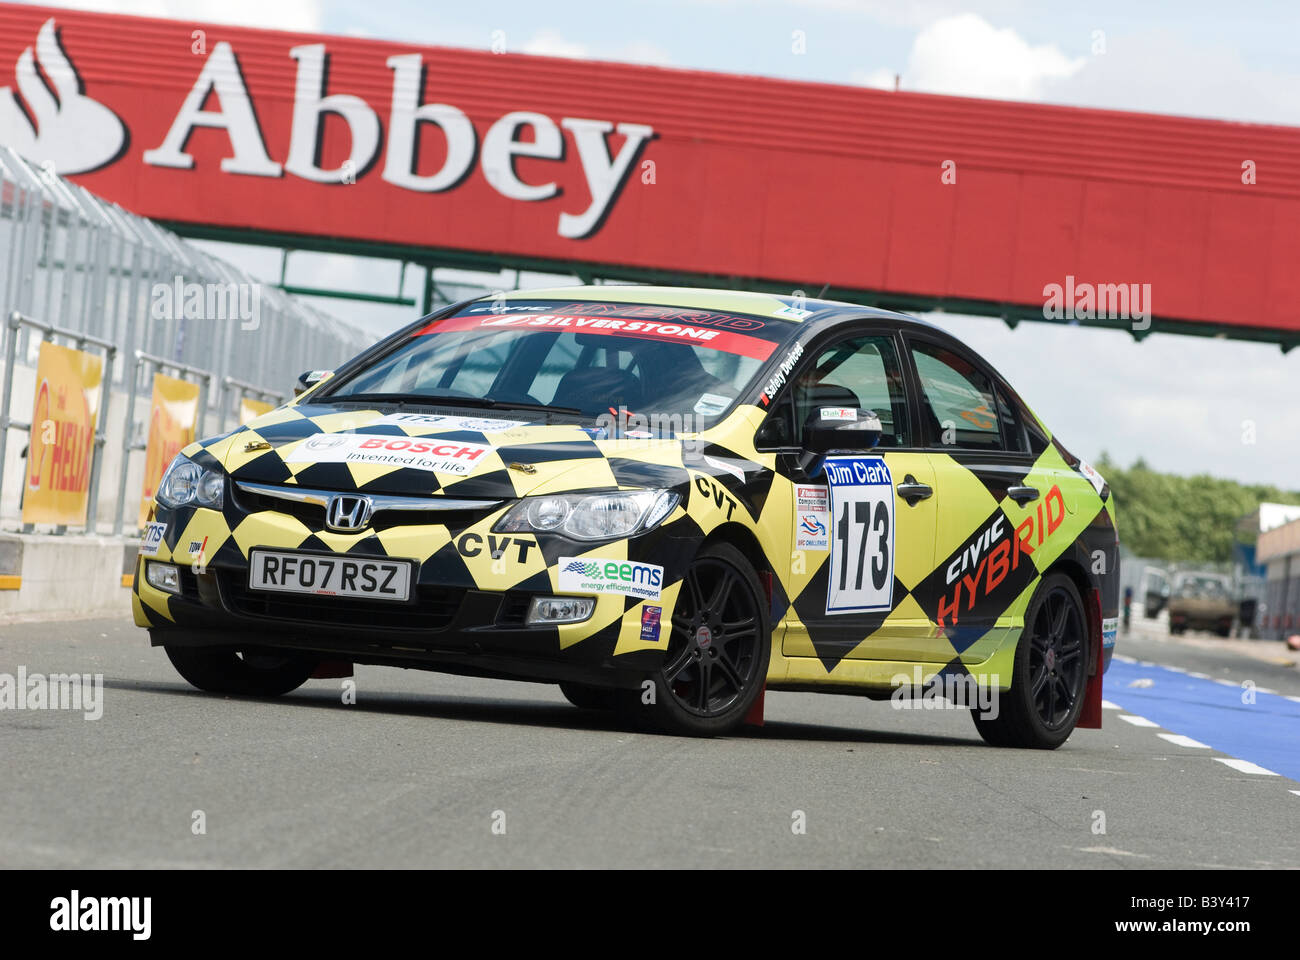 Oaktec Honda civic hybrid car in racing colours at silverstone circuit in the uk Stock Photo